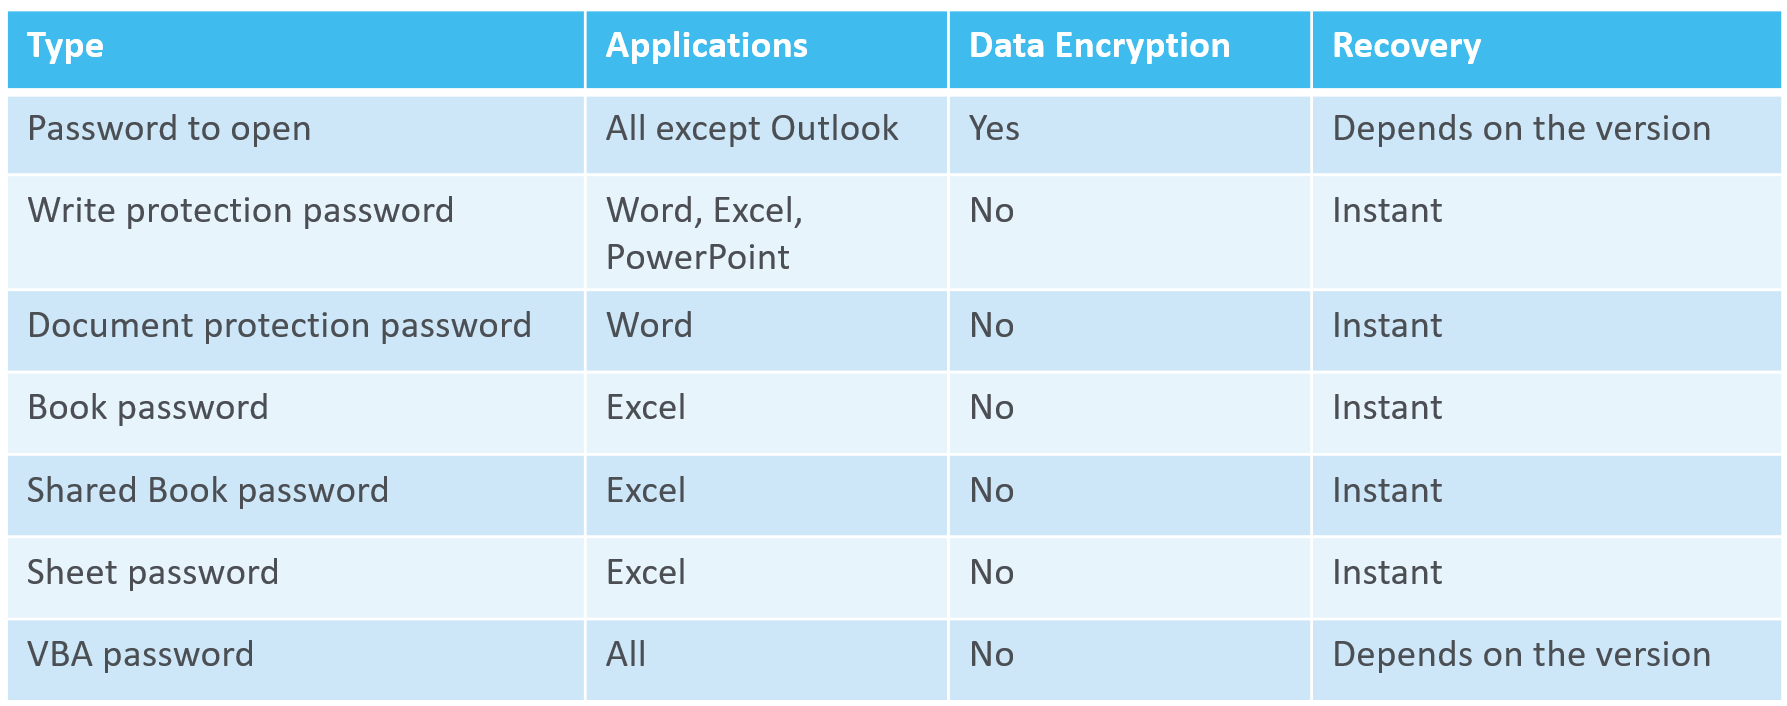 Microsoft Office encryption evolution: from Office 97 to Office 2019 |  ElcomSoft blog